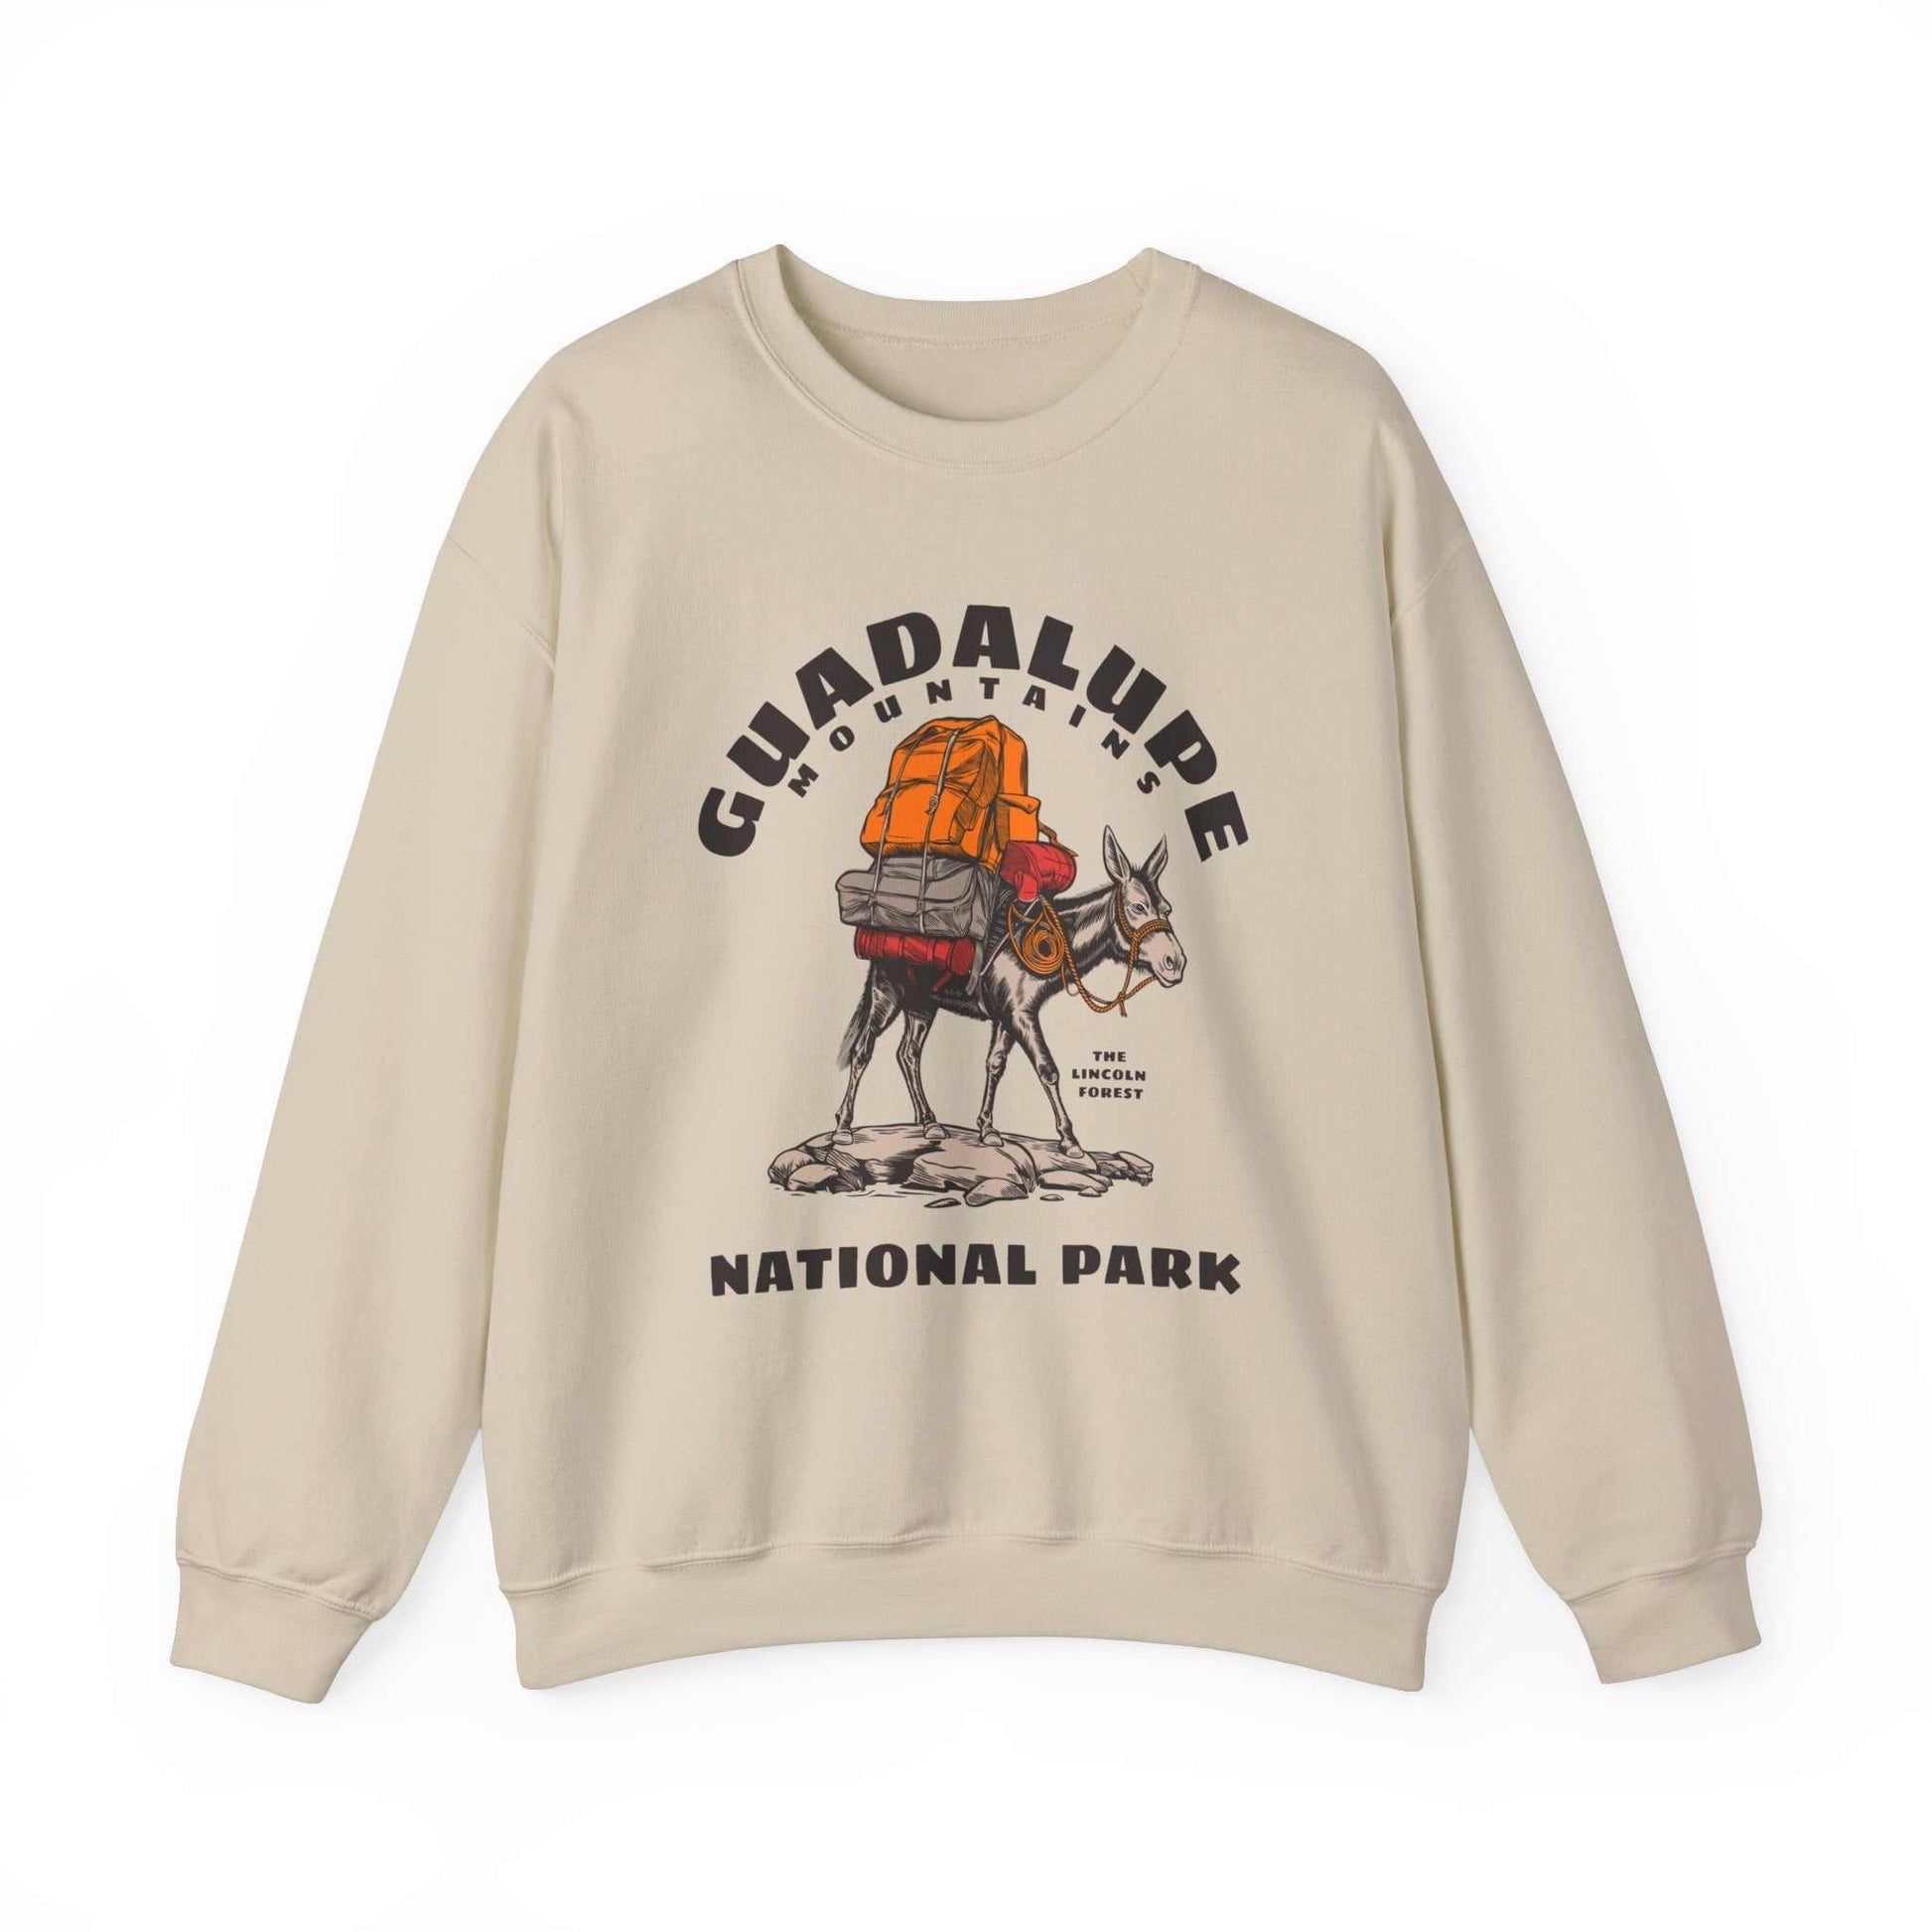 Guadalupe Mountains National Park SweatshirtDetails:
- medium weight ultra soft fabric - unisex sizing
The Lincoln Forest cares deeply about the planet and creating a business that gives back to nature. That’s